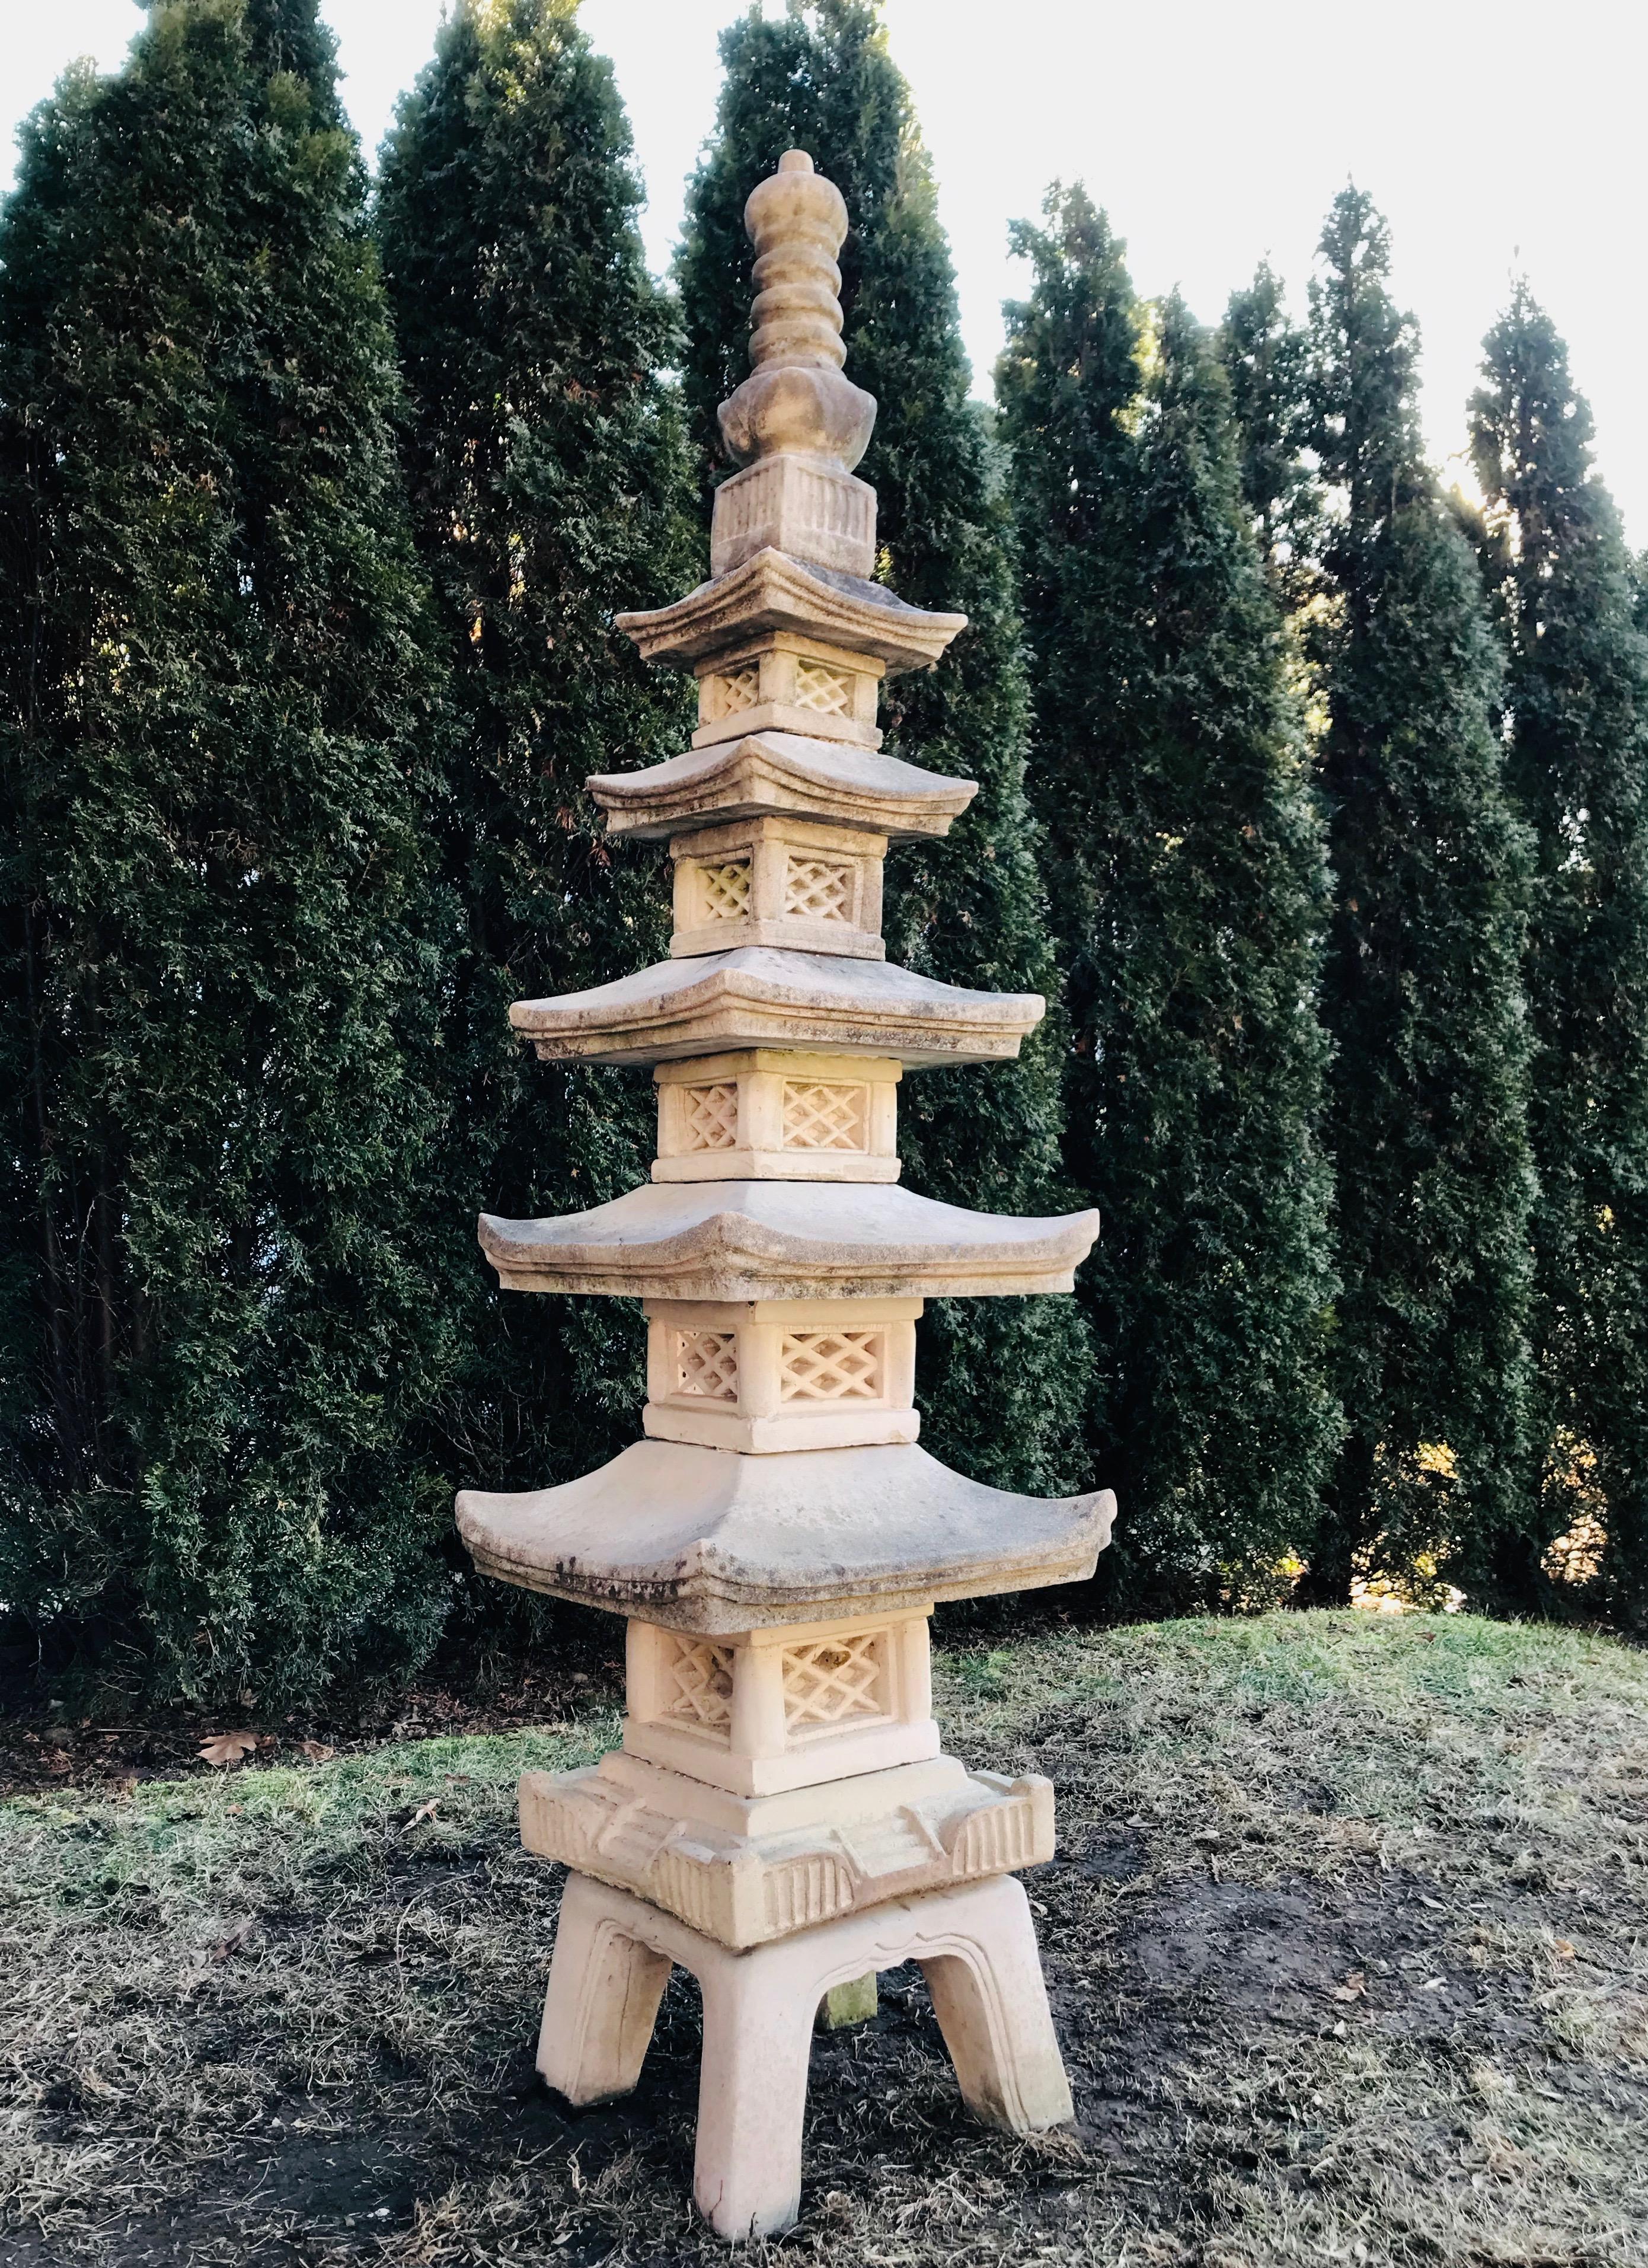 This lovely cast stone pagoda once served as a focal point on a small island lake in southern England and would make the perfect piece for your Japanese garden, surrounded by mounded moss and dwarf thread-leaf maples. In 6 pieces for easy transport